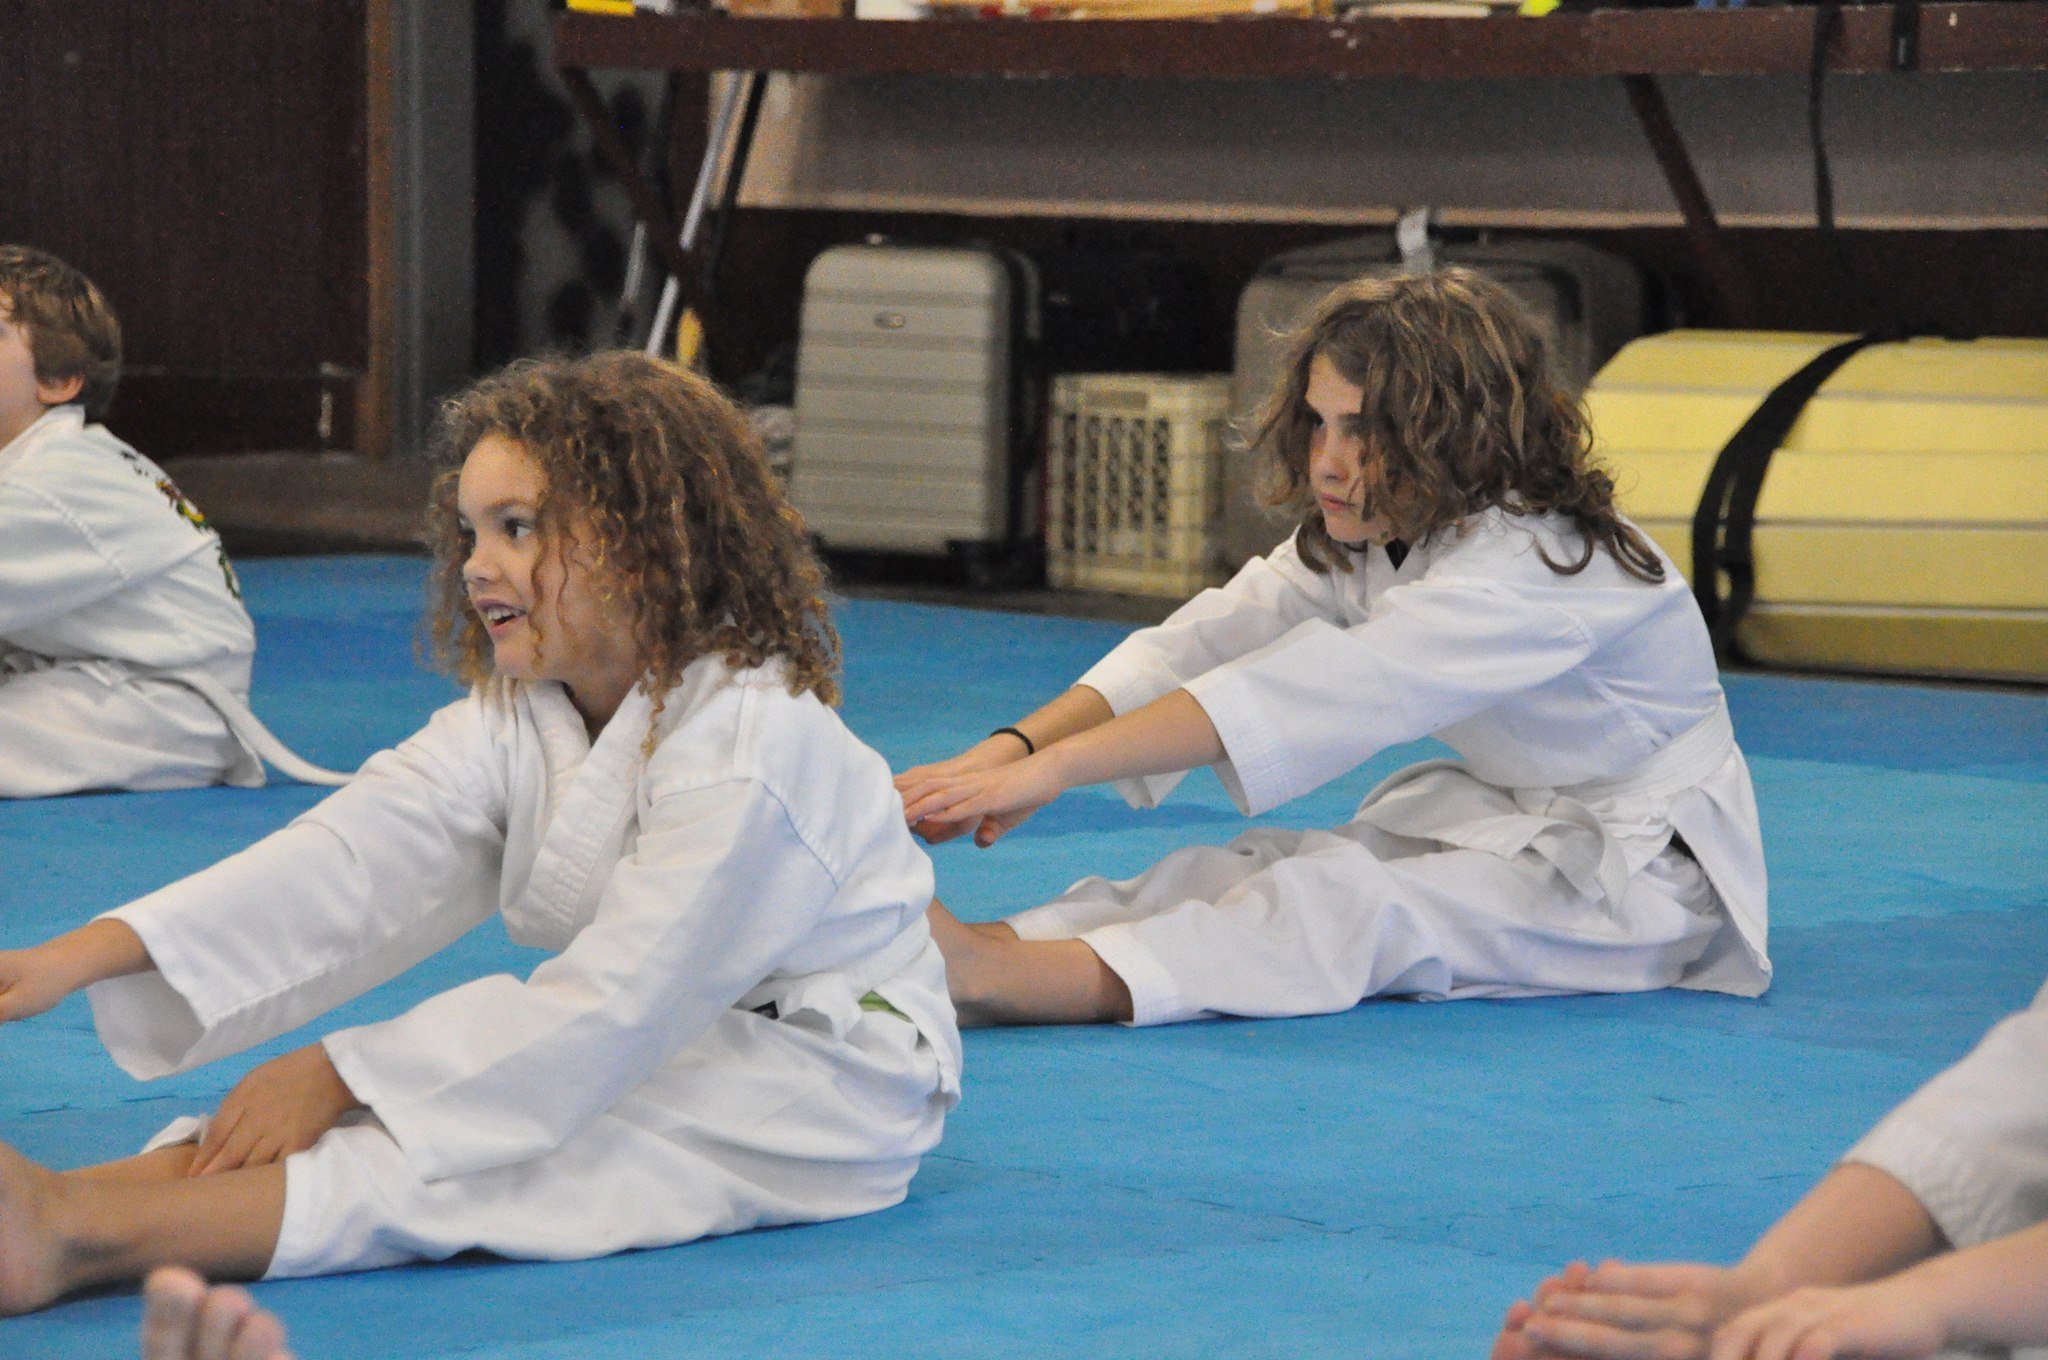 Kids stretching in kung fu class.